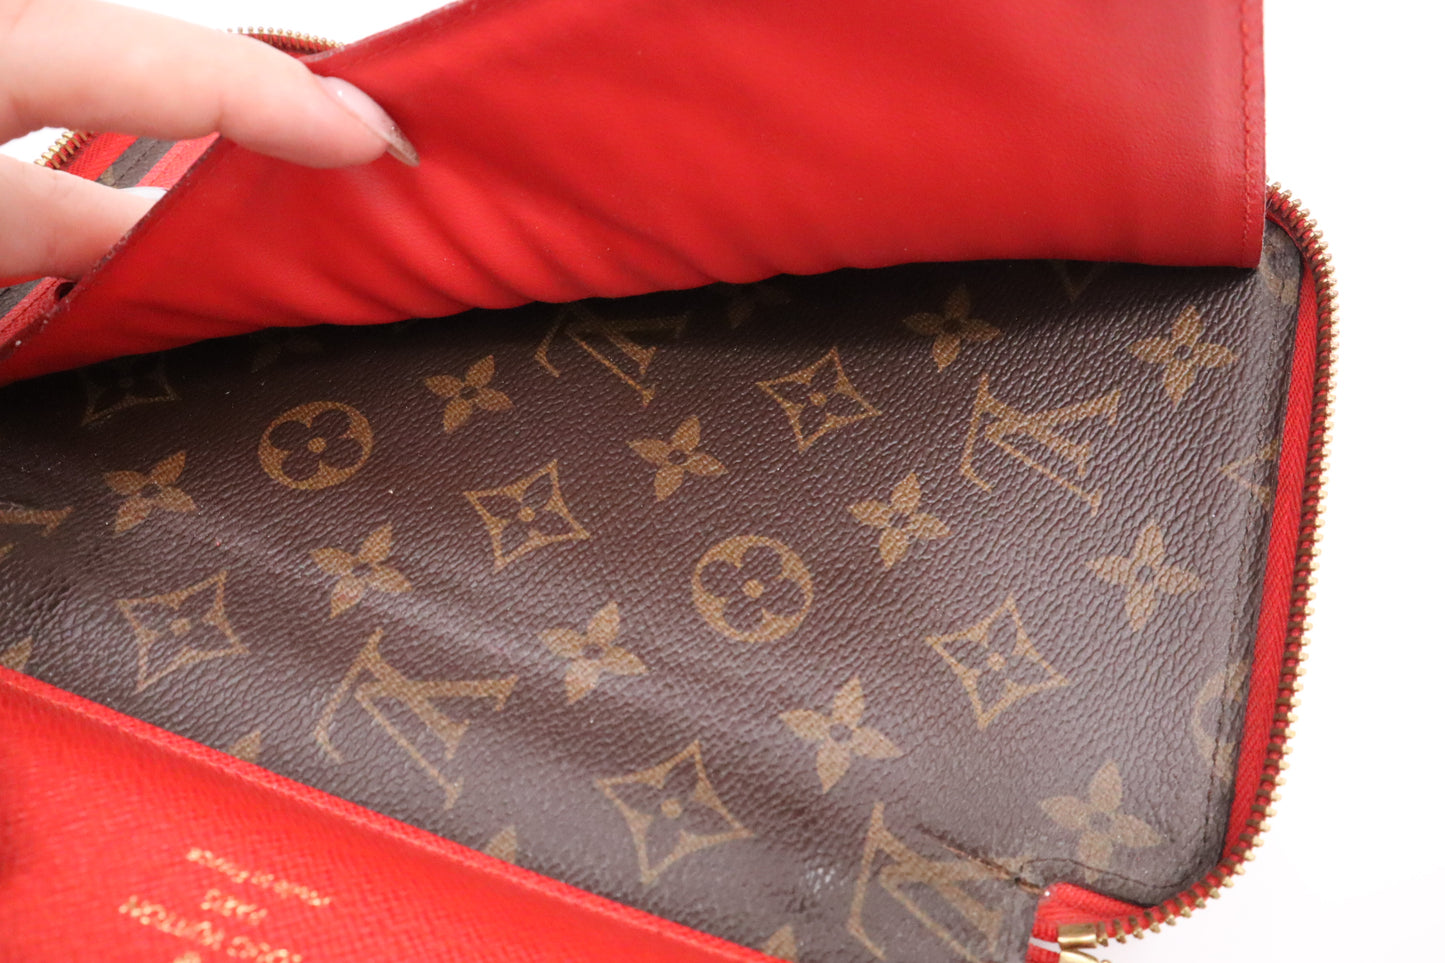 Louis Vuitton Retiro Daily Organizer in Monogram Canvas and Red Leather